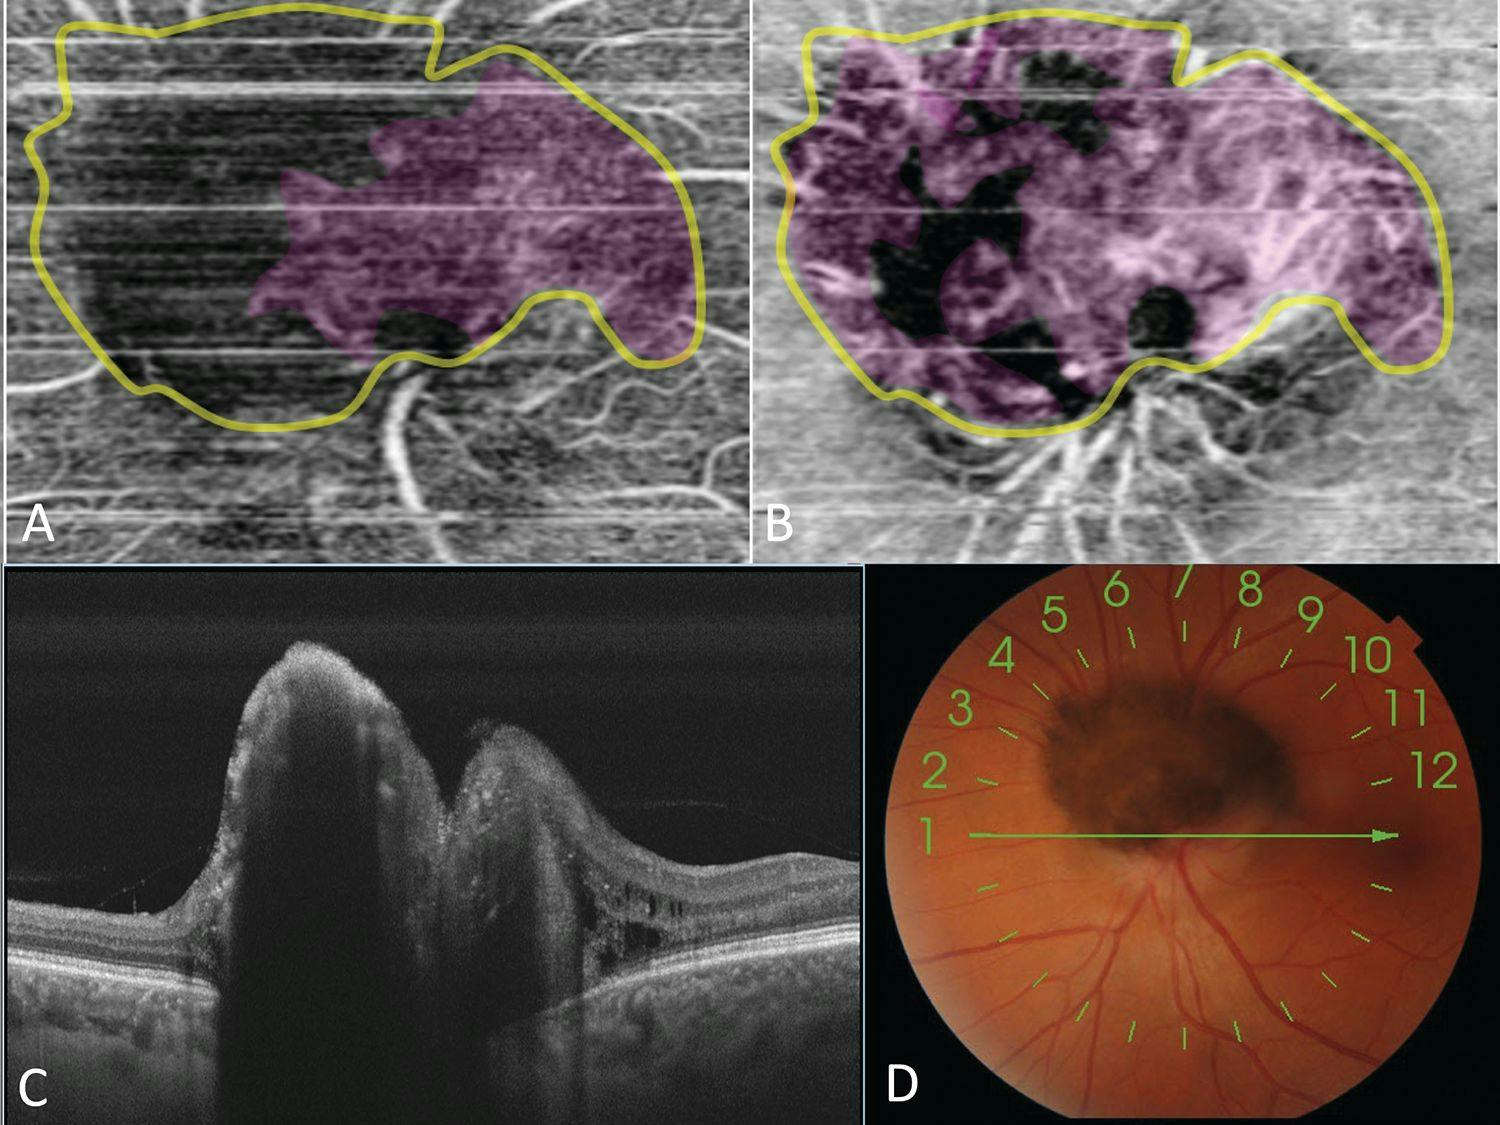 Images of deep tissues of the eye